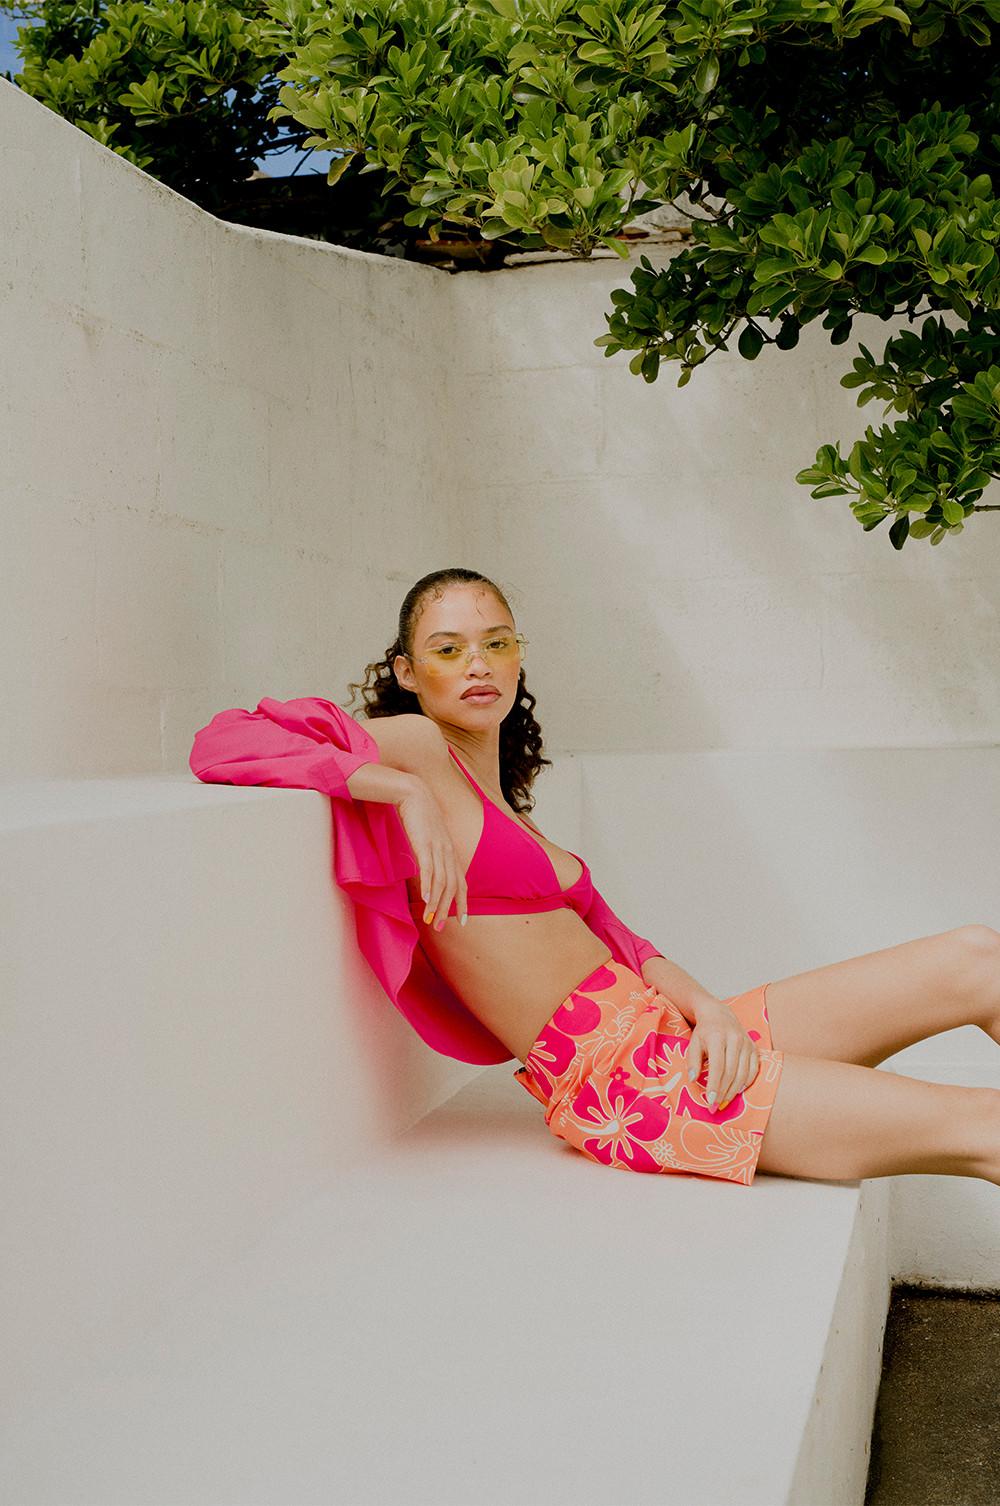 Model wears printed shorts paired with pink bralette and shirt